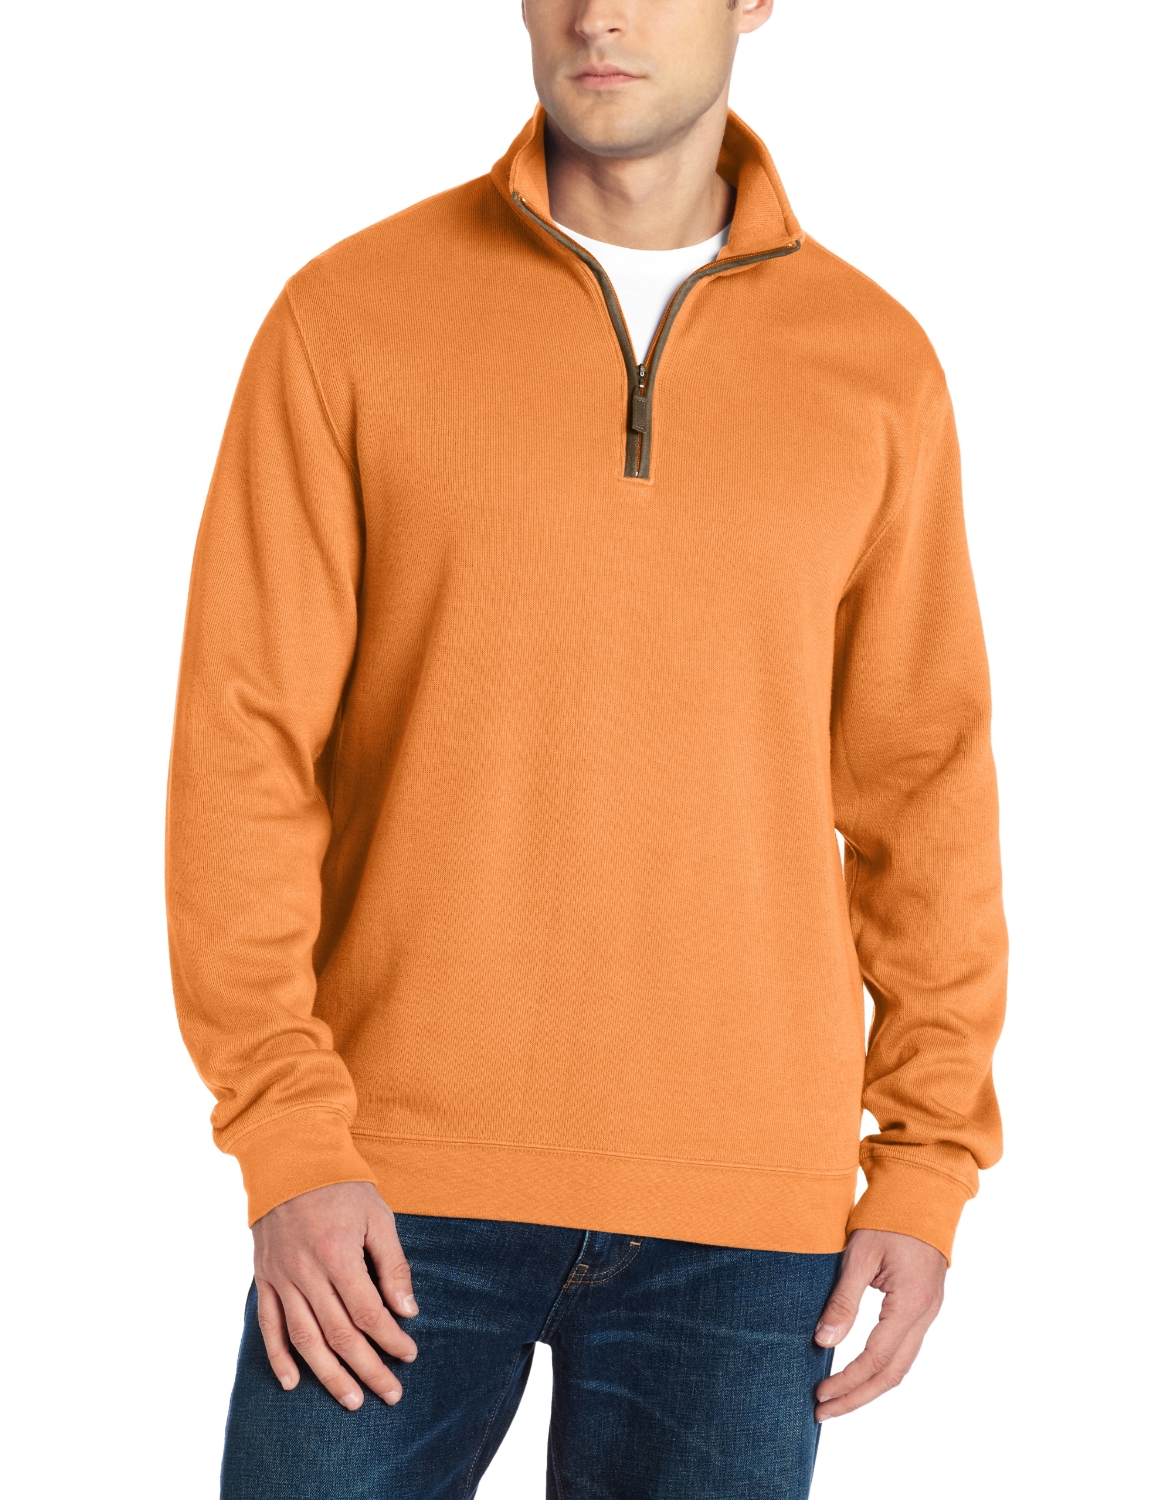 Greg Norman Mens Collection Contemporary Mock Pullovers